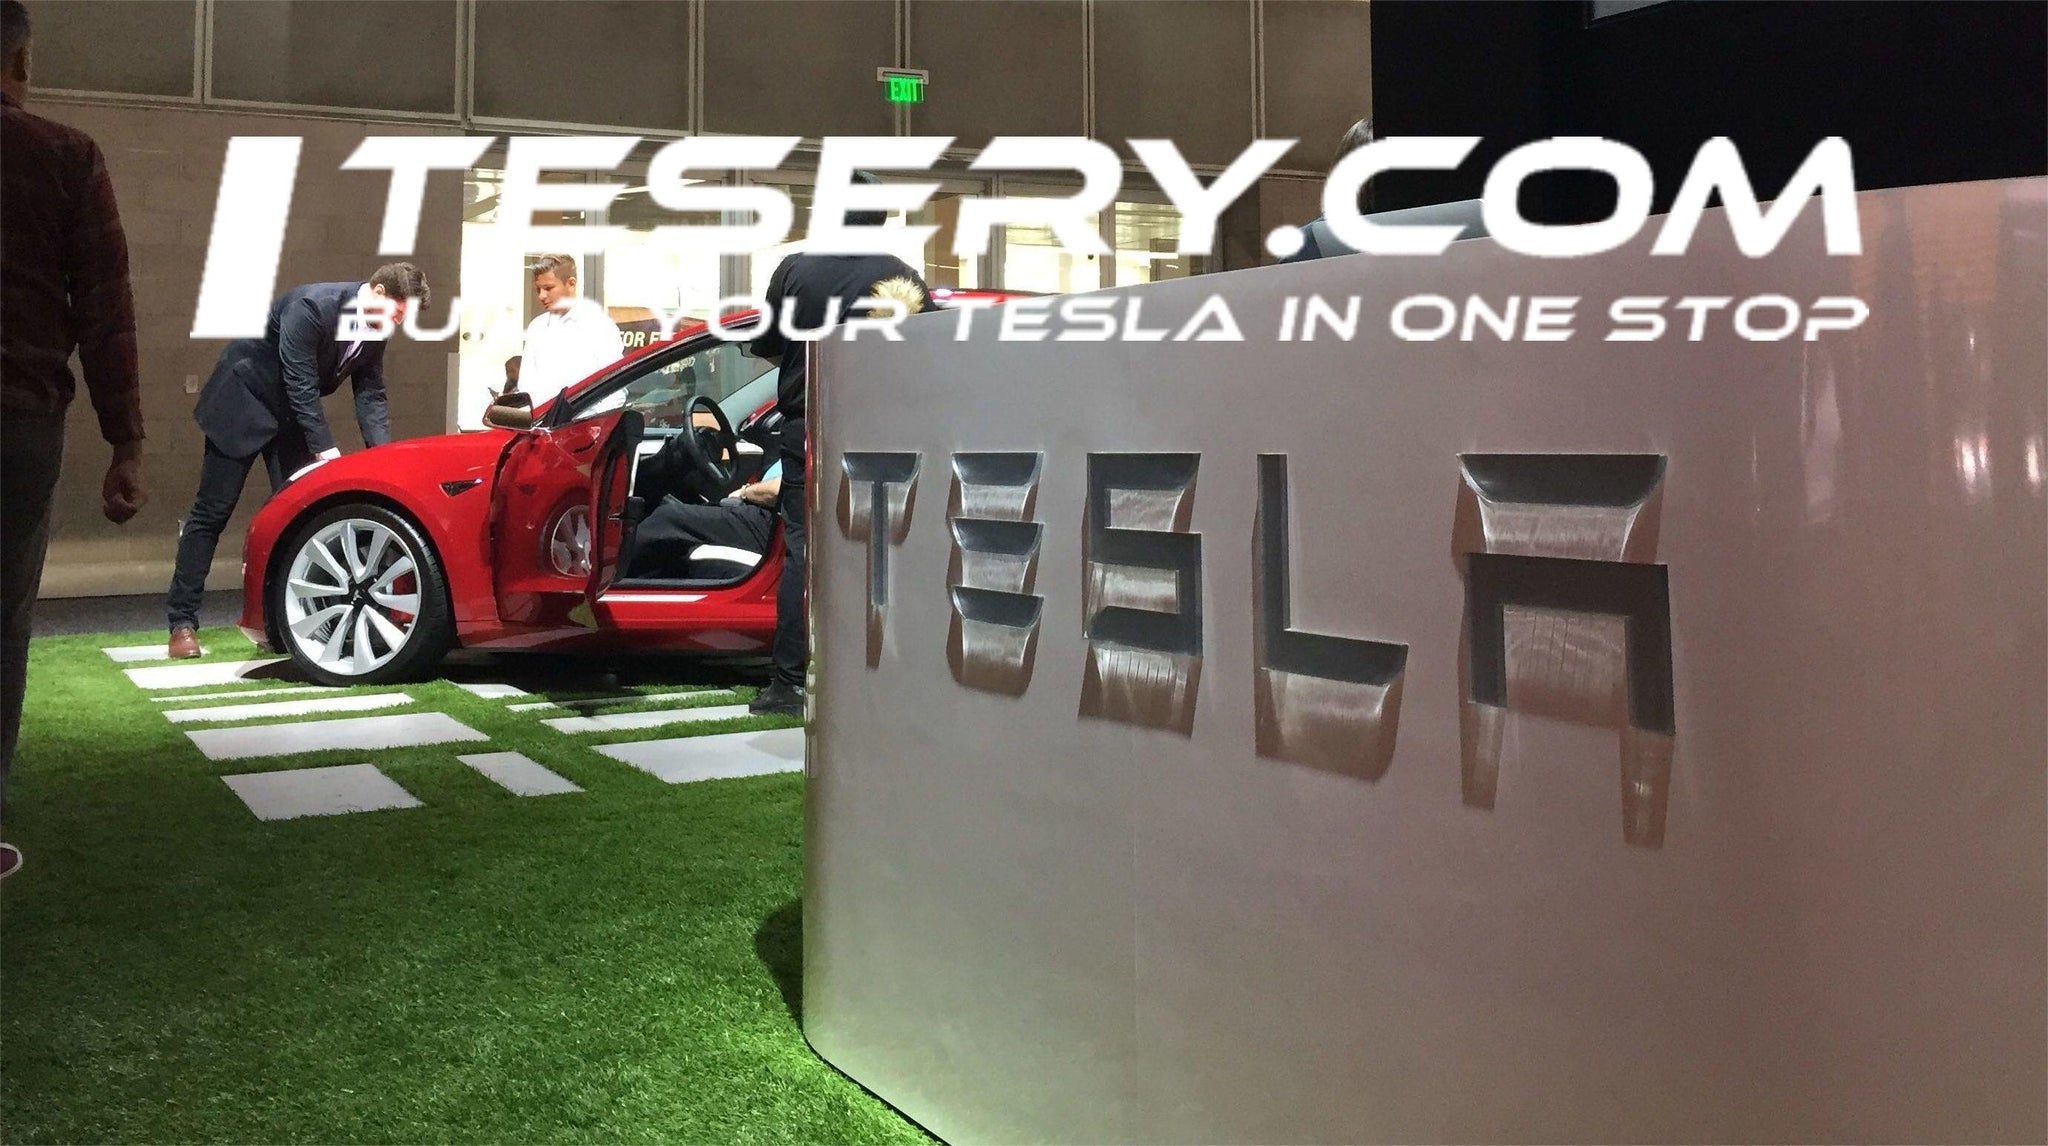 Tesla's Investment Plans in Indonesia: Exploring Battery Materials Plant - Tesery Official Store